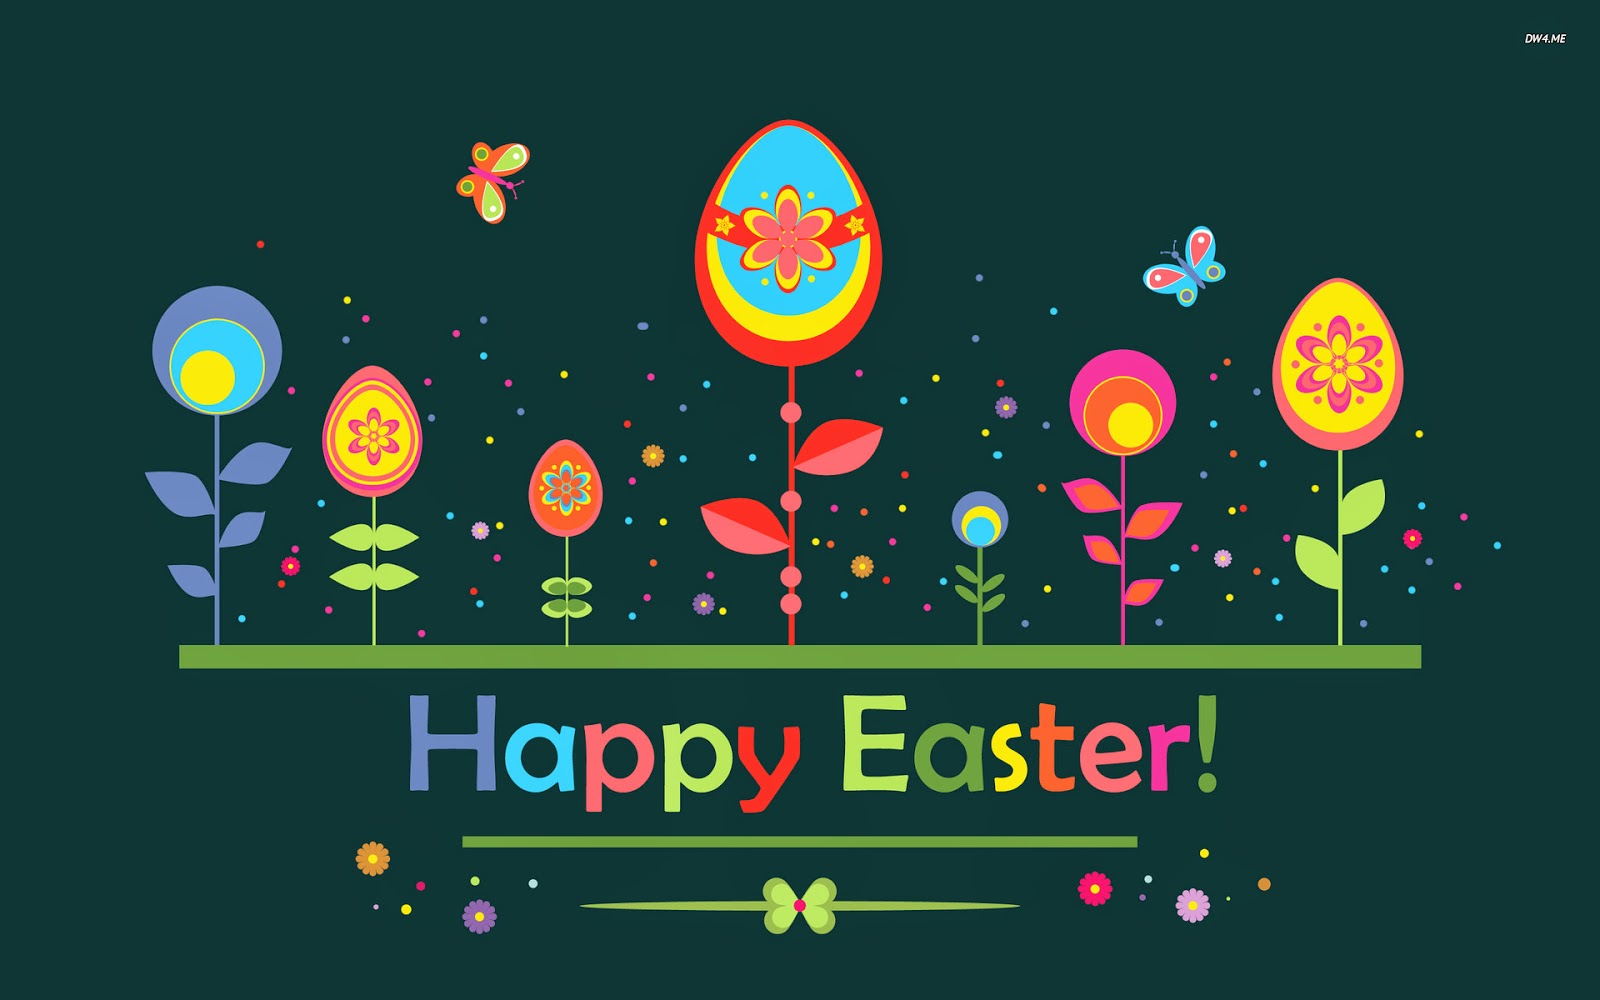 Happy Easter : We all are blessed : eAskme